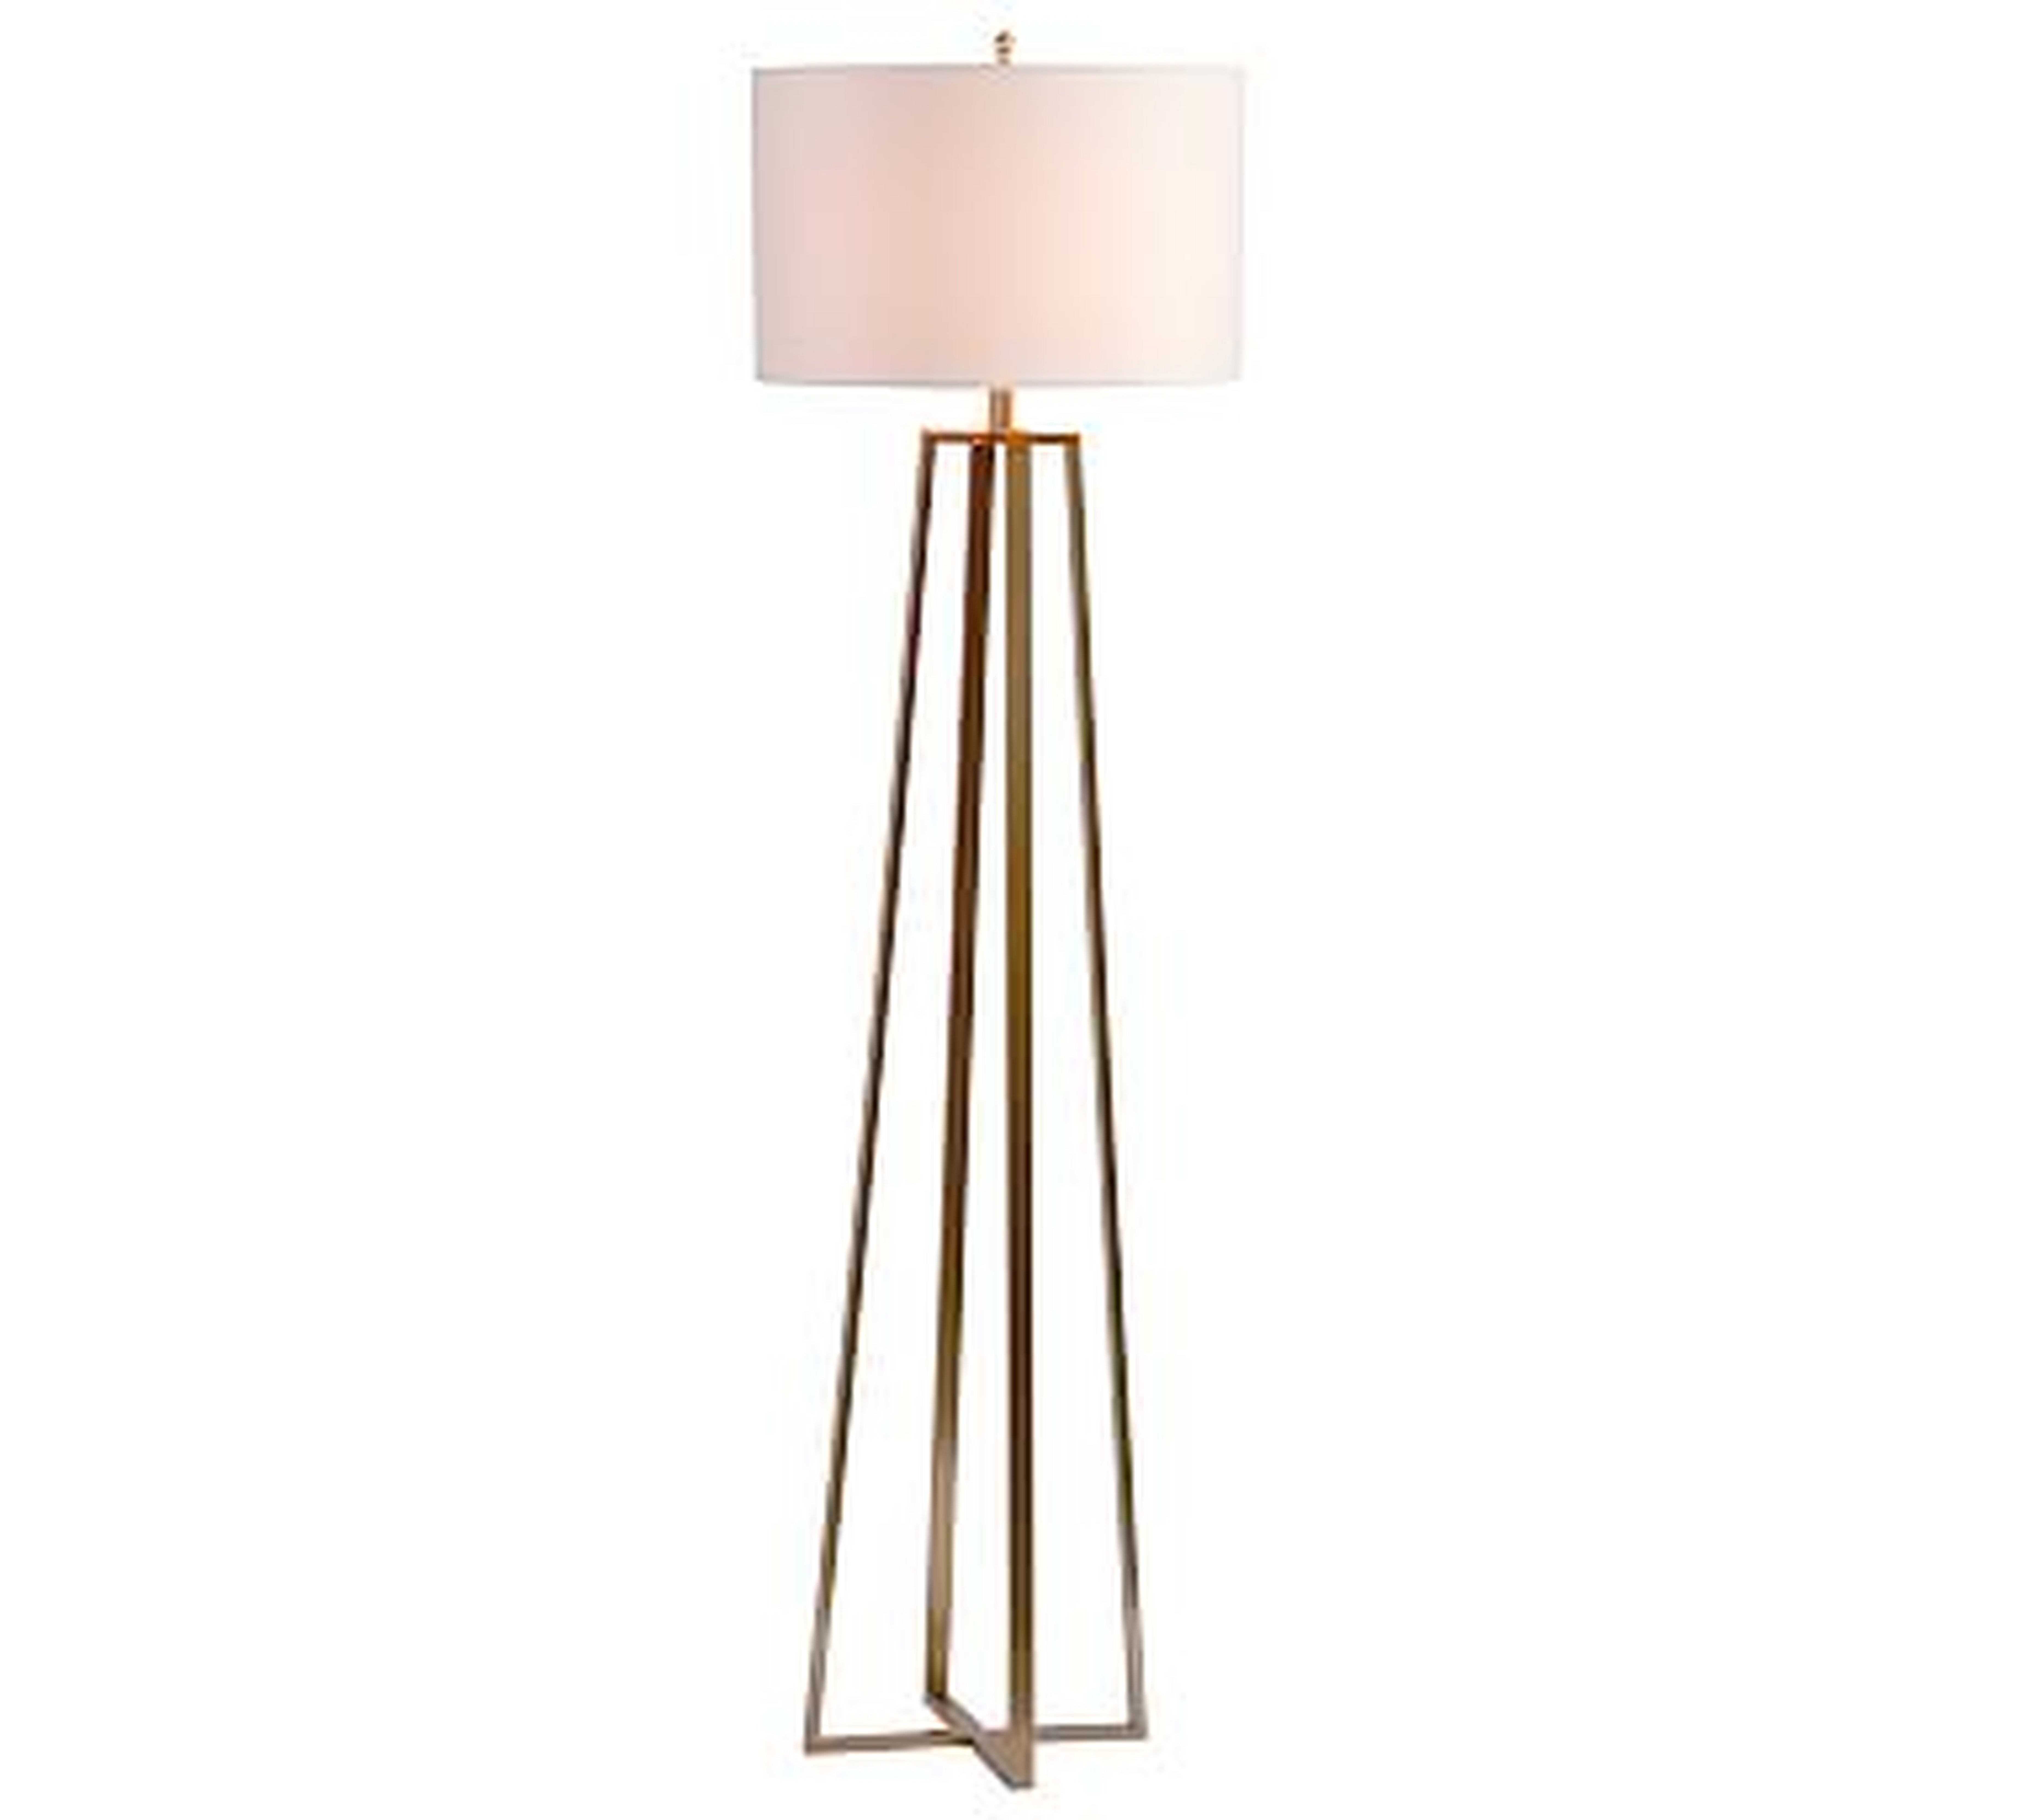 Carter Metal 58" Floor Lamp, Champange Brass with Ivory Shade - Pottery Barn